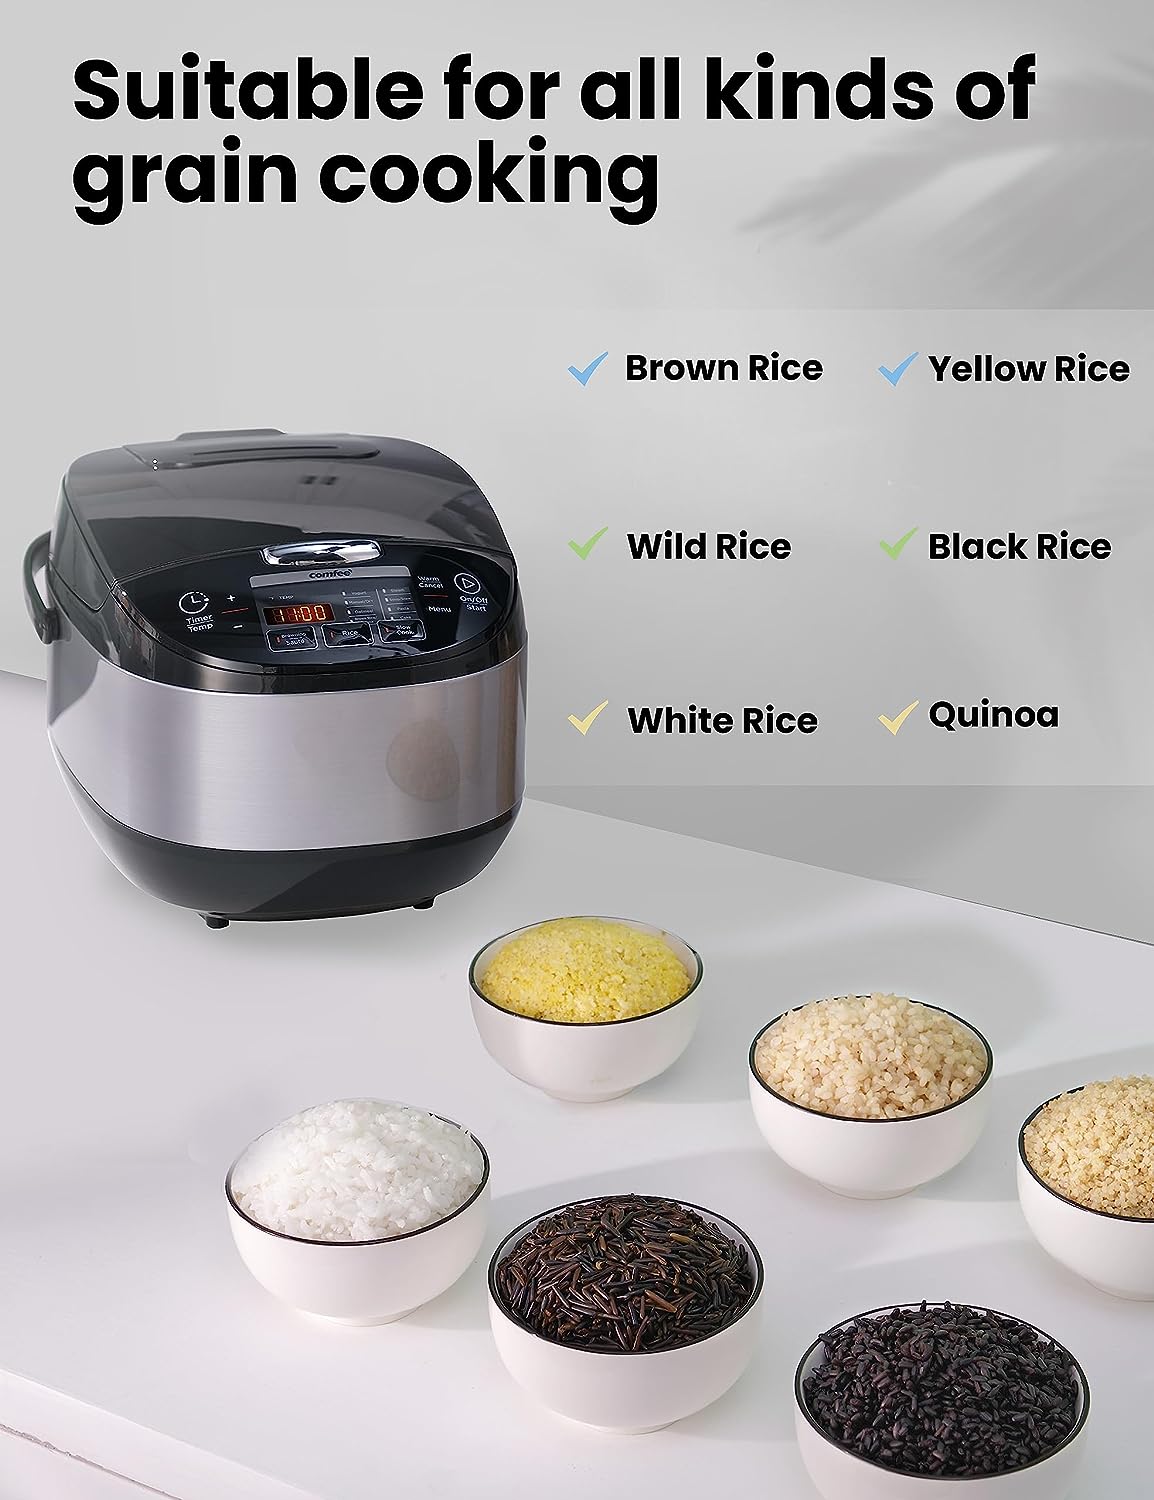 COMFEE' Rice Cooker, Asian Style Large Rice Cooker with Fuzzy Logic  Technology, 11 Presets, 10 Cup Uncooked/20 Cup Cooked, Auto Keep Warm,  24-Hr Delay Timer